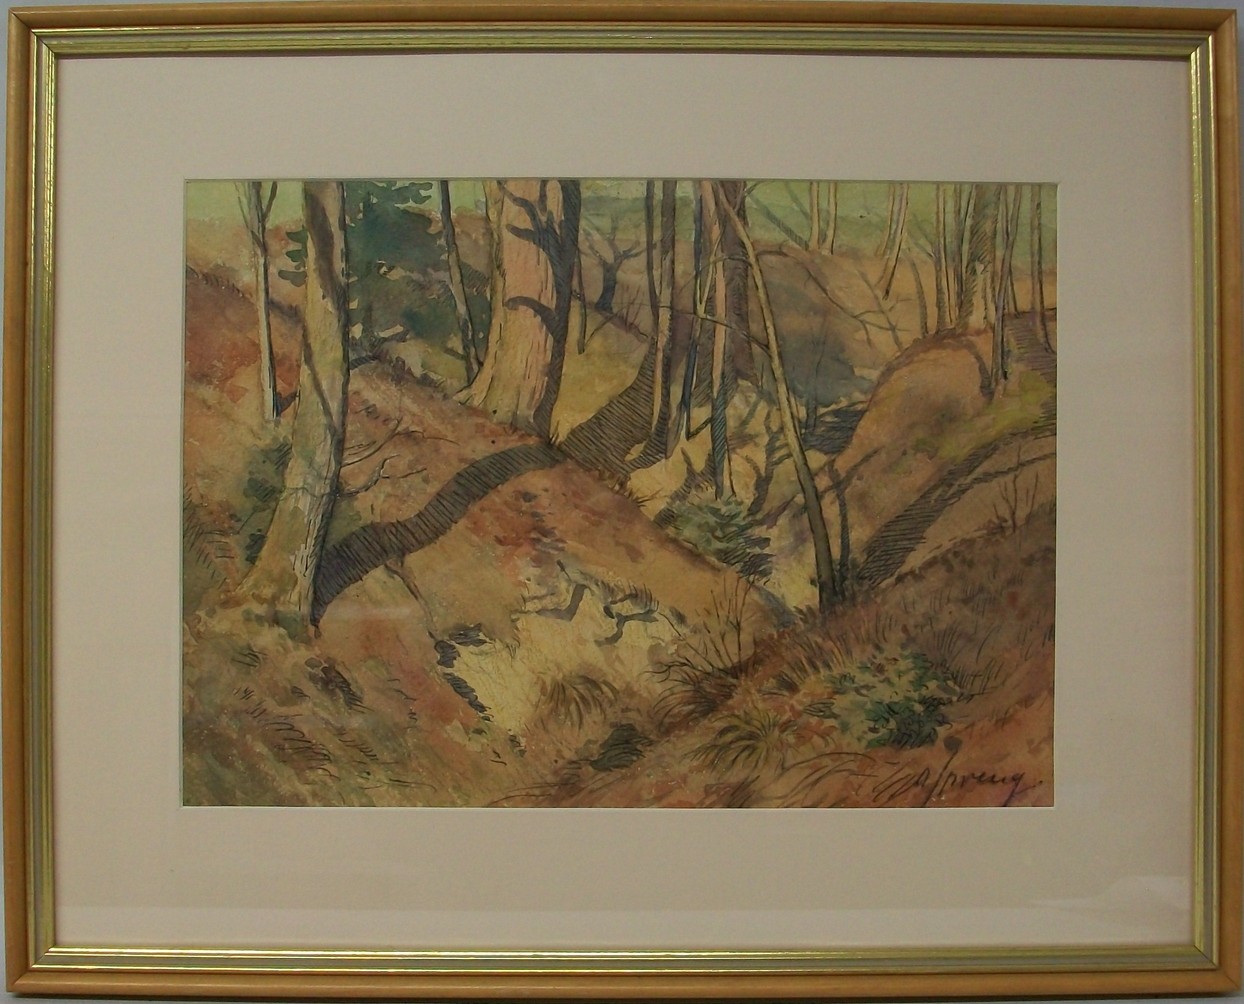 Otto Spreng (Swiss, 1877-1960): a pen, ink and watercolour of autumn in the forest, signed lower